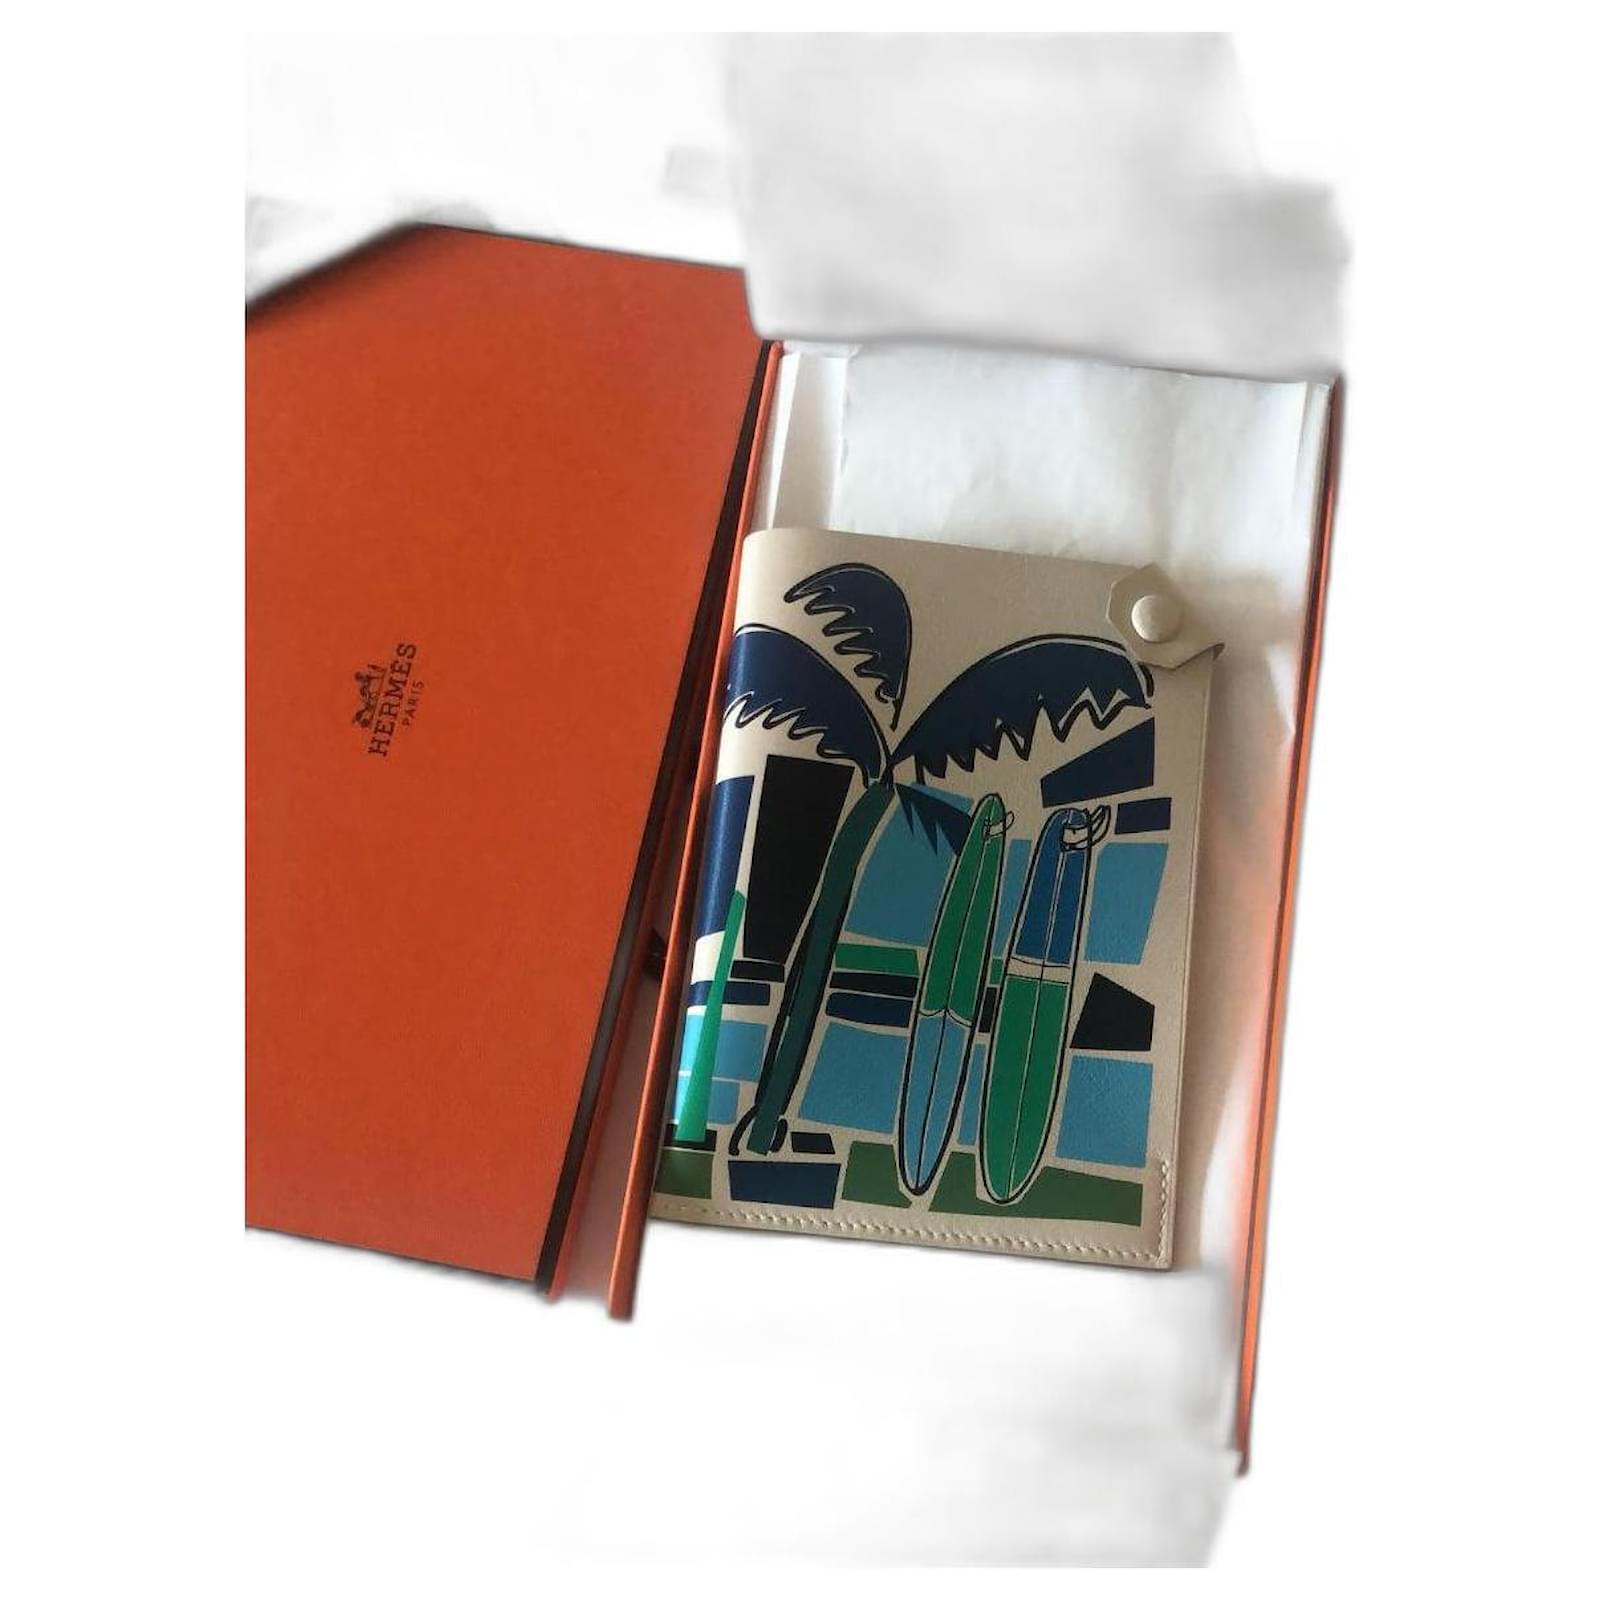 Hermes, Other, Hermes Box And Ribbon